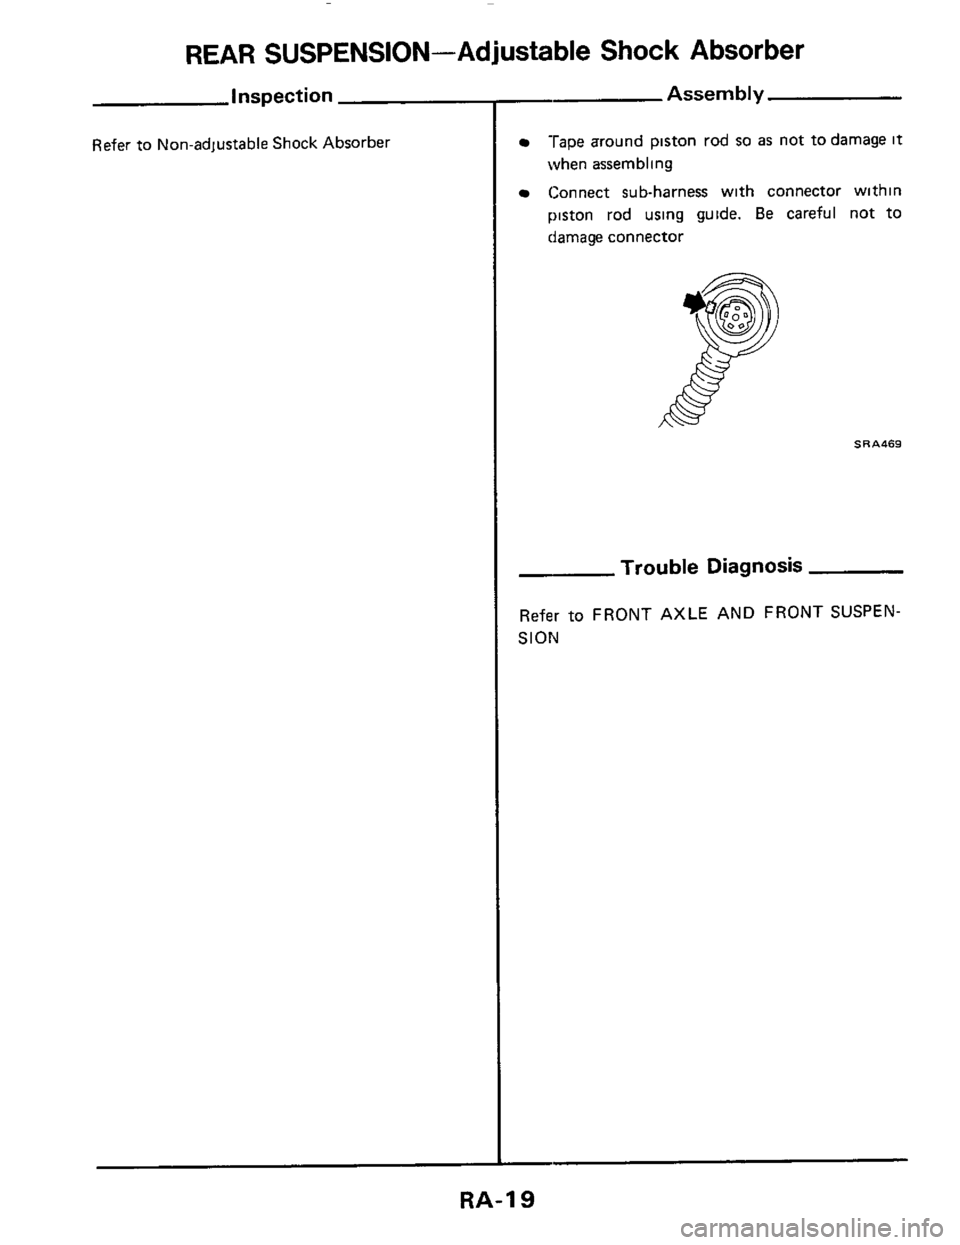 NISSAN 300ZX 1984 Z31 Rear Suspension User Guide ~ REAR SUSPENSION- Adjustable Shock Absorber 
Inspection 
Refer to 
Non-adjustable  Shock Absorber Tape around  piston rod so as not to damage It 
when  assembling 
Connect  sub-harness  with connecto